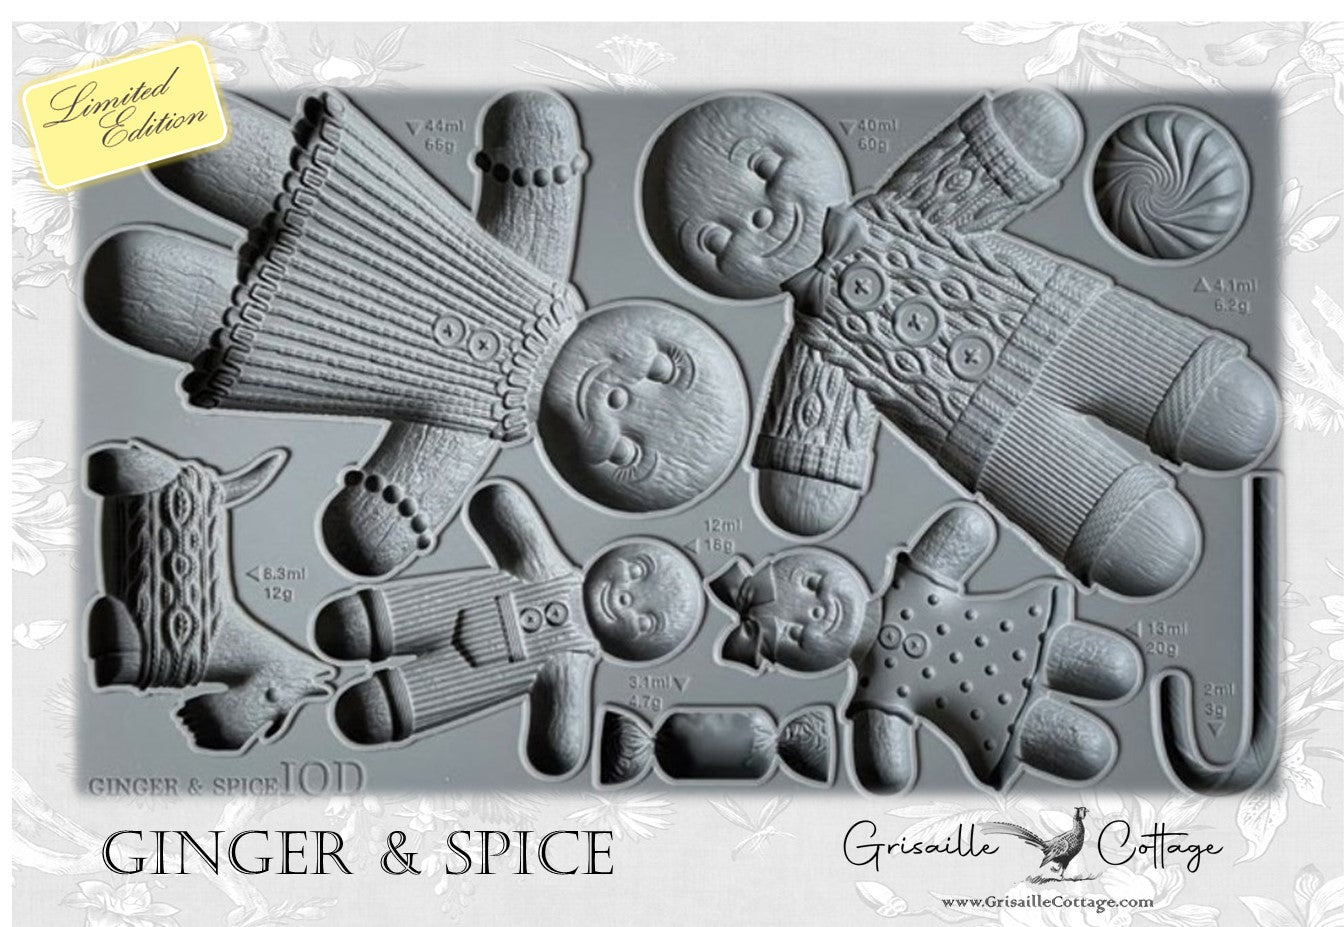 Ginger & Spice - IOD Decor Mould *Limited Edition*